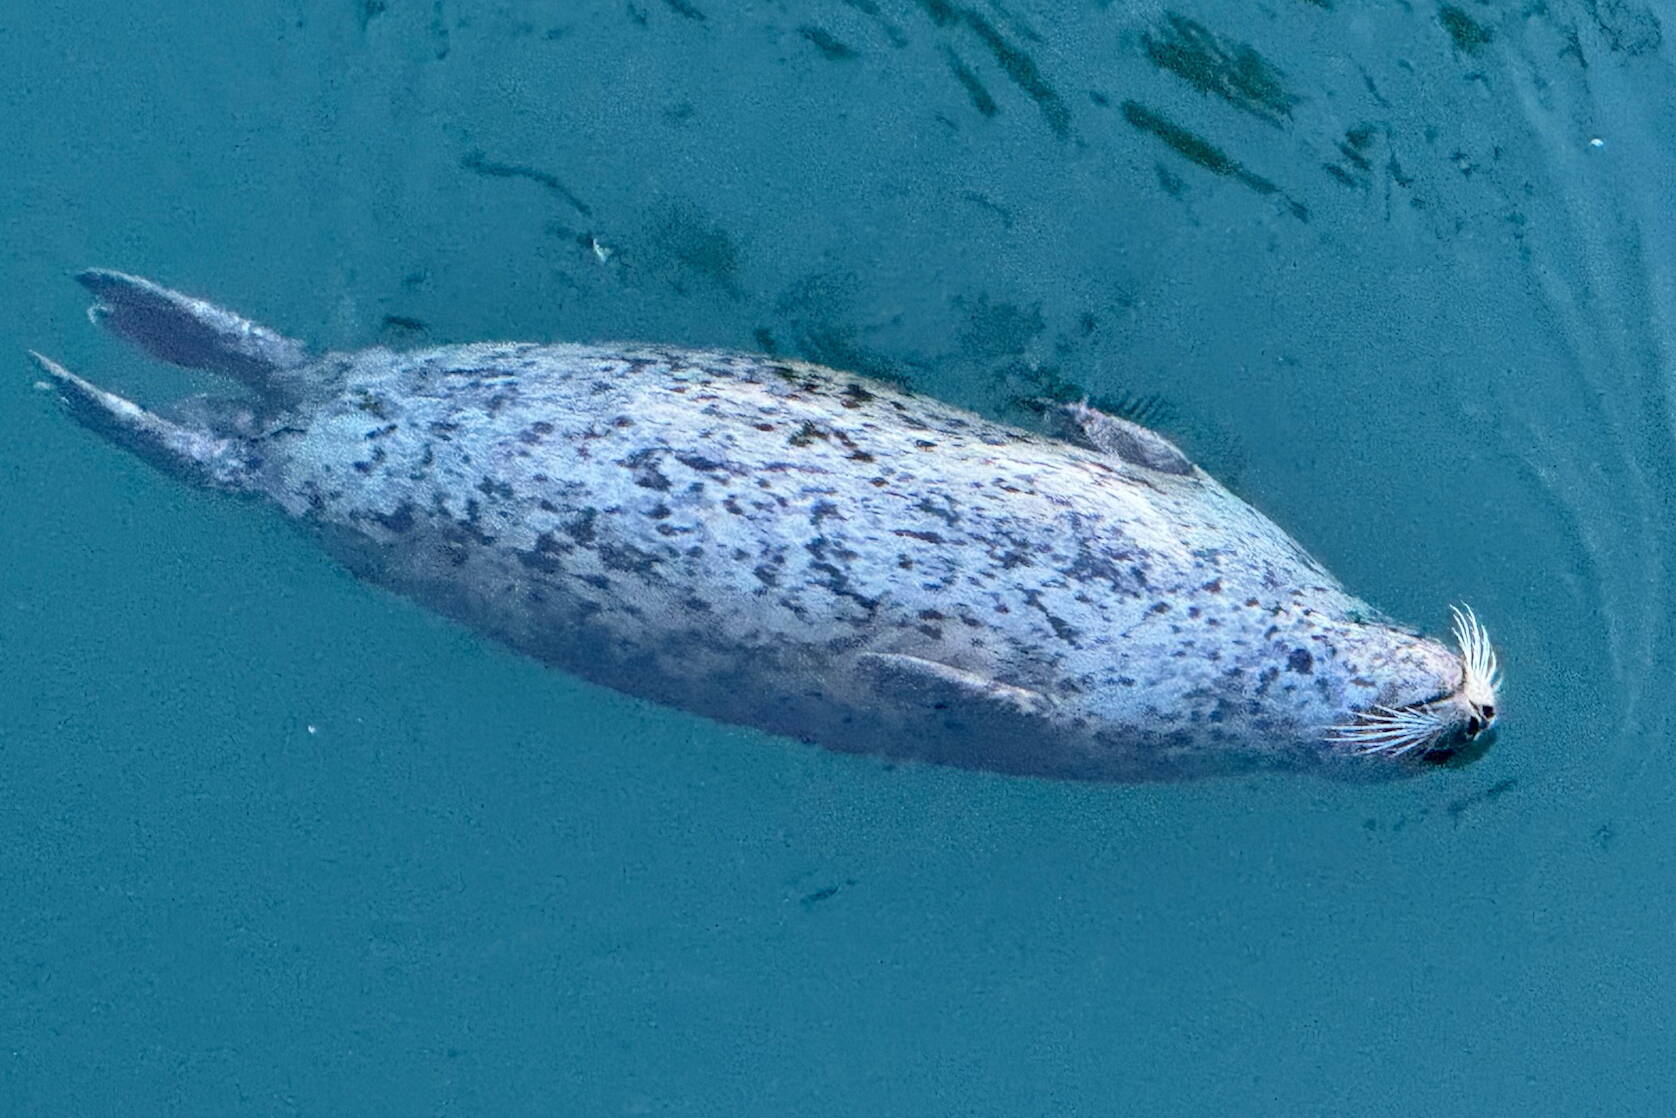 A harbor seal lazily floats in the calm cool downtown harbor waters on March 21. (Photo by Denise Carroll)